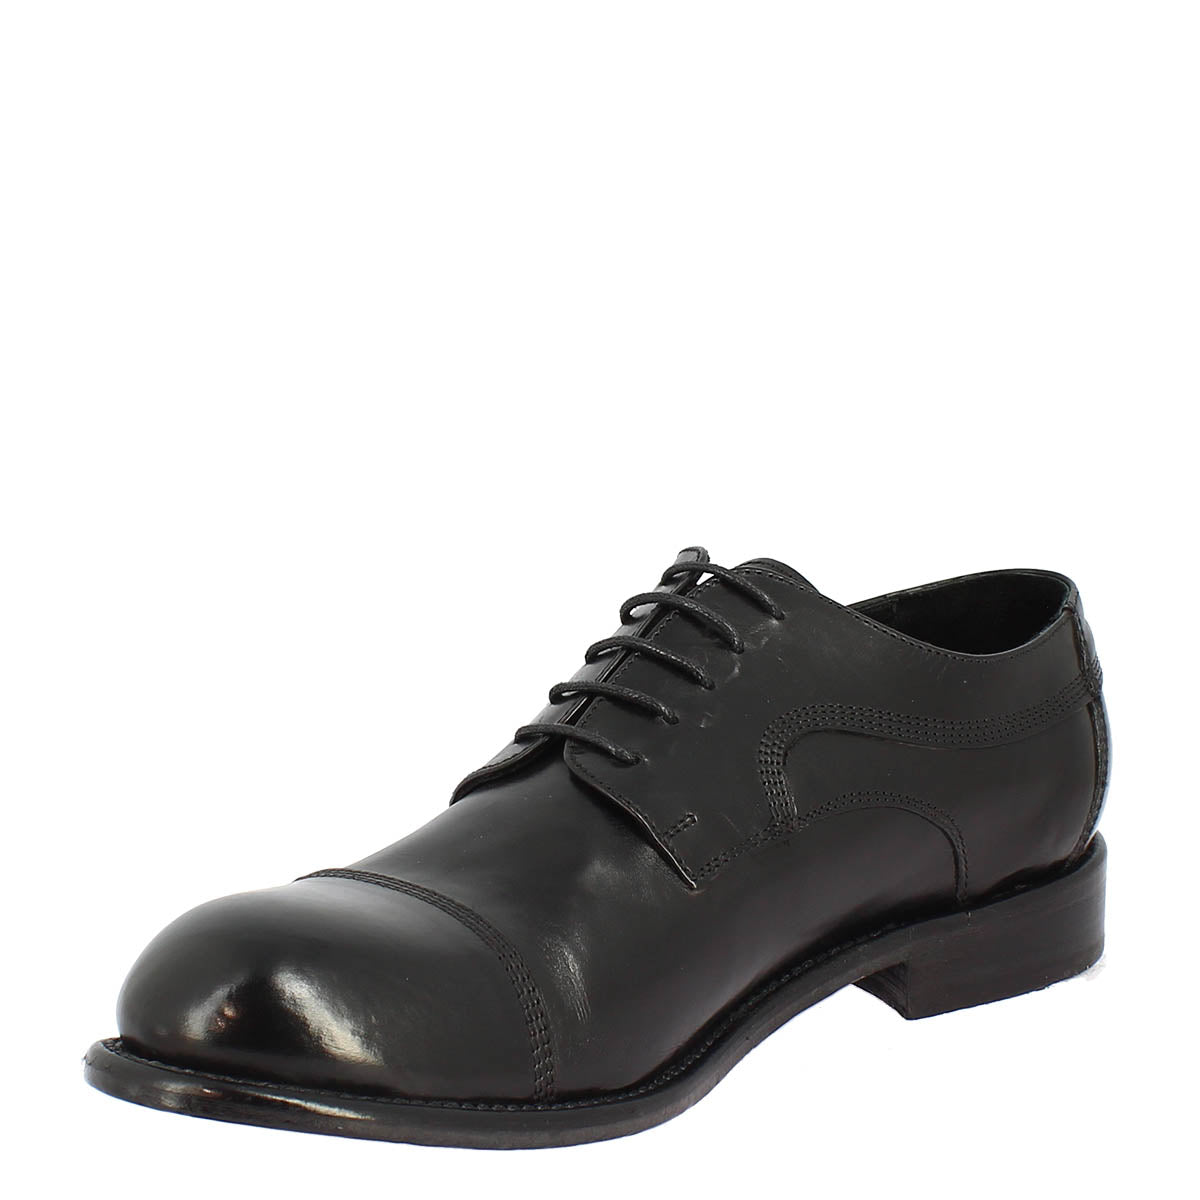 Men's handmade formal lace-up shoes in black calf <tc>LEATHER</tc>